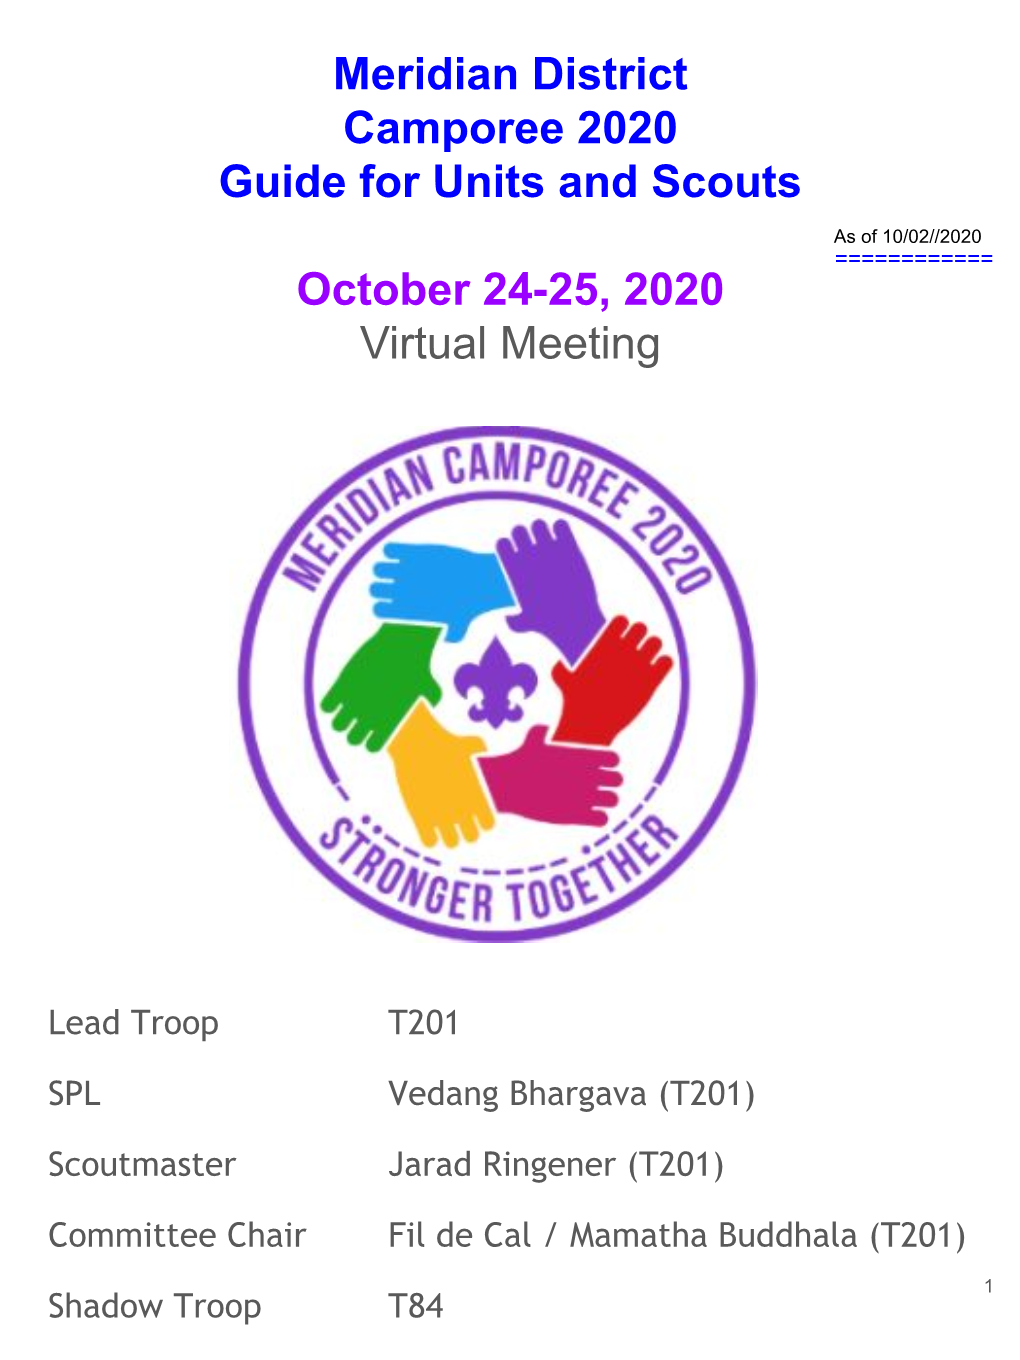 Meridian District Camporee 2020 Guide for Units and Scouts October